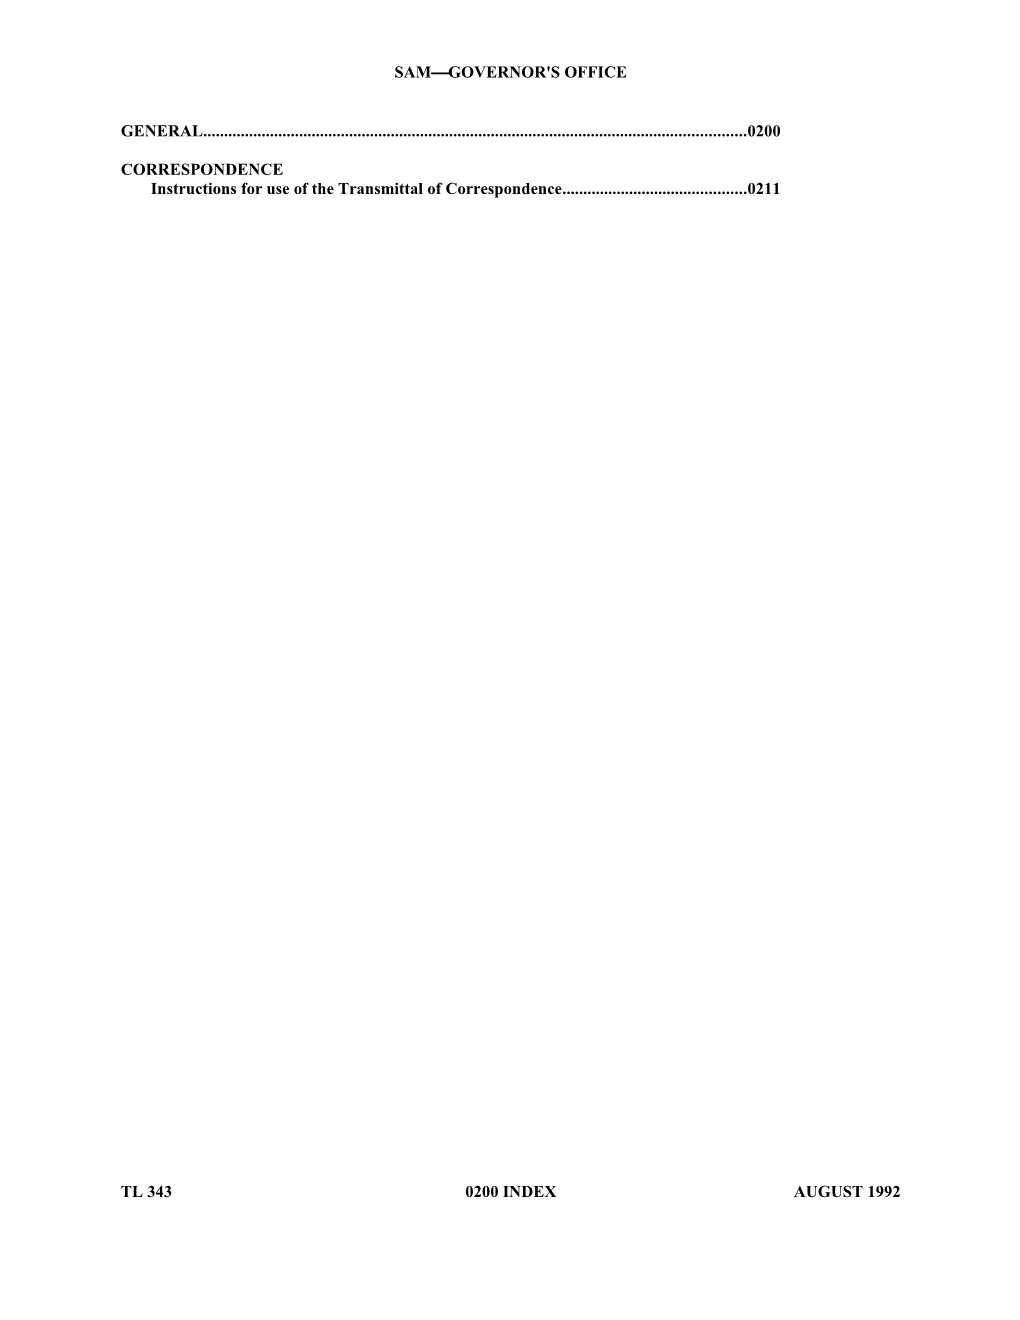 Instructions for Use of the Transmittal of Correspondence 0211